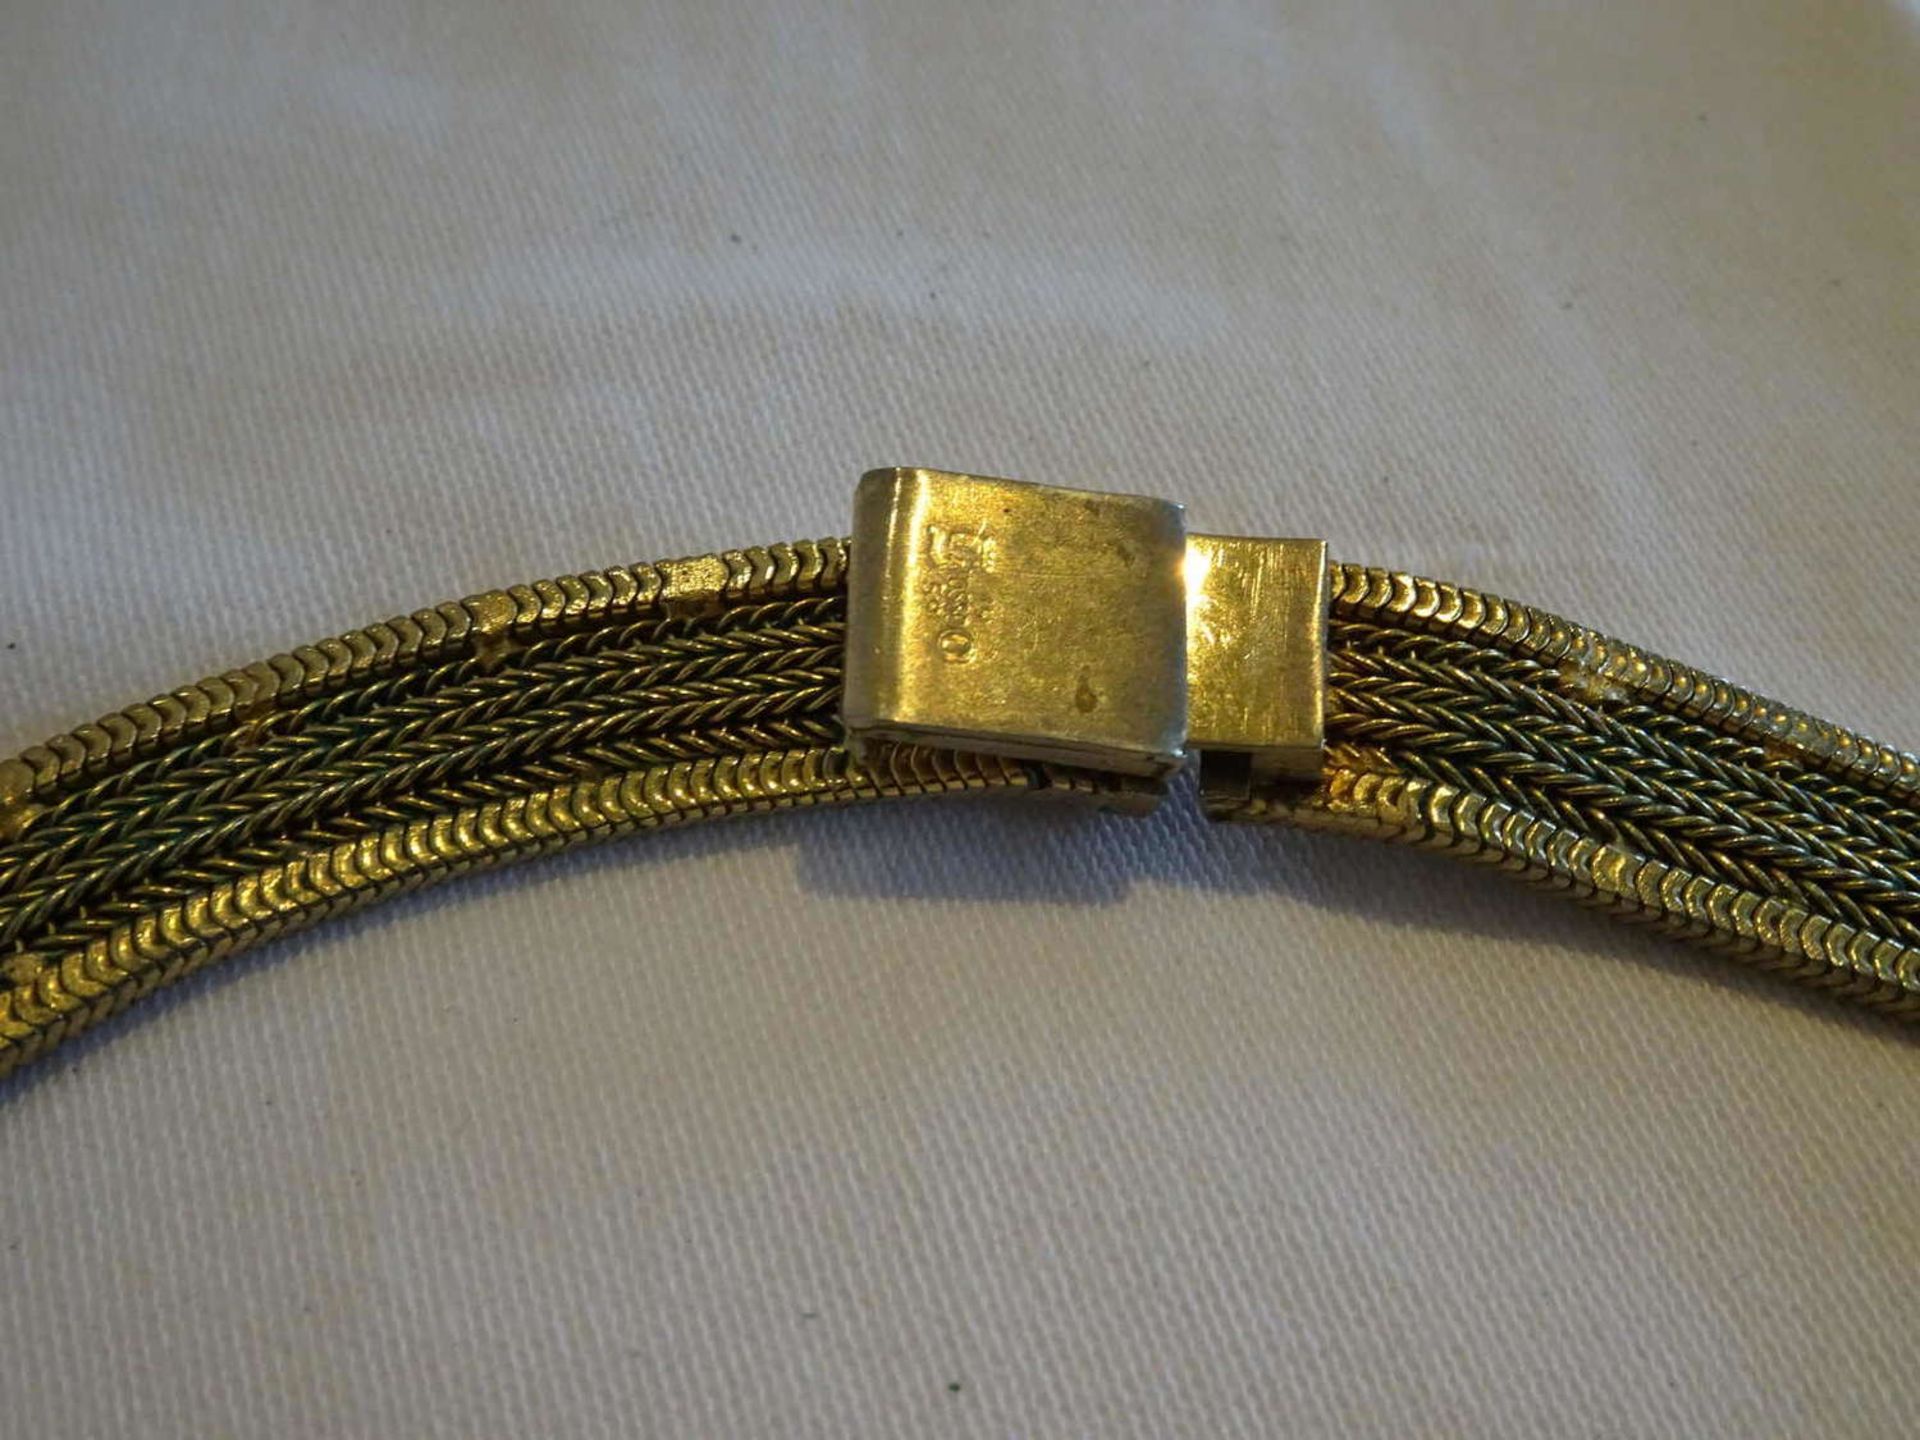 Fashion jewelry necklace, gold-plated, from Grosse 1959. - Bild 2 aus 2